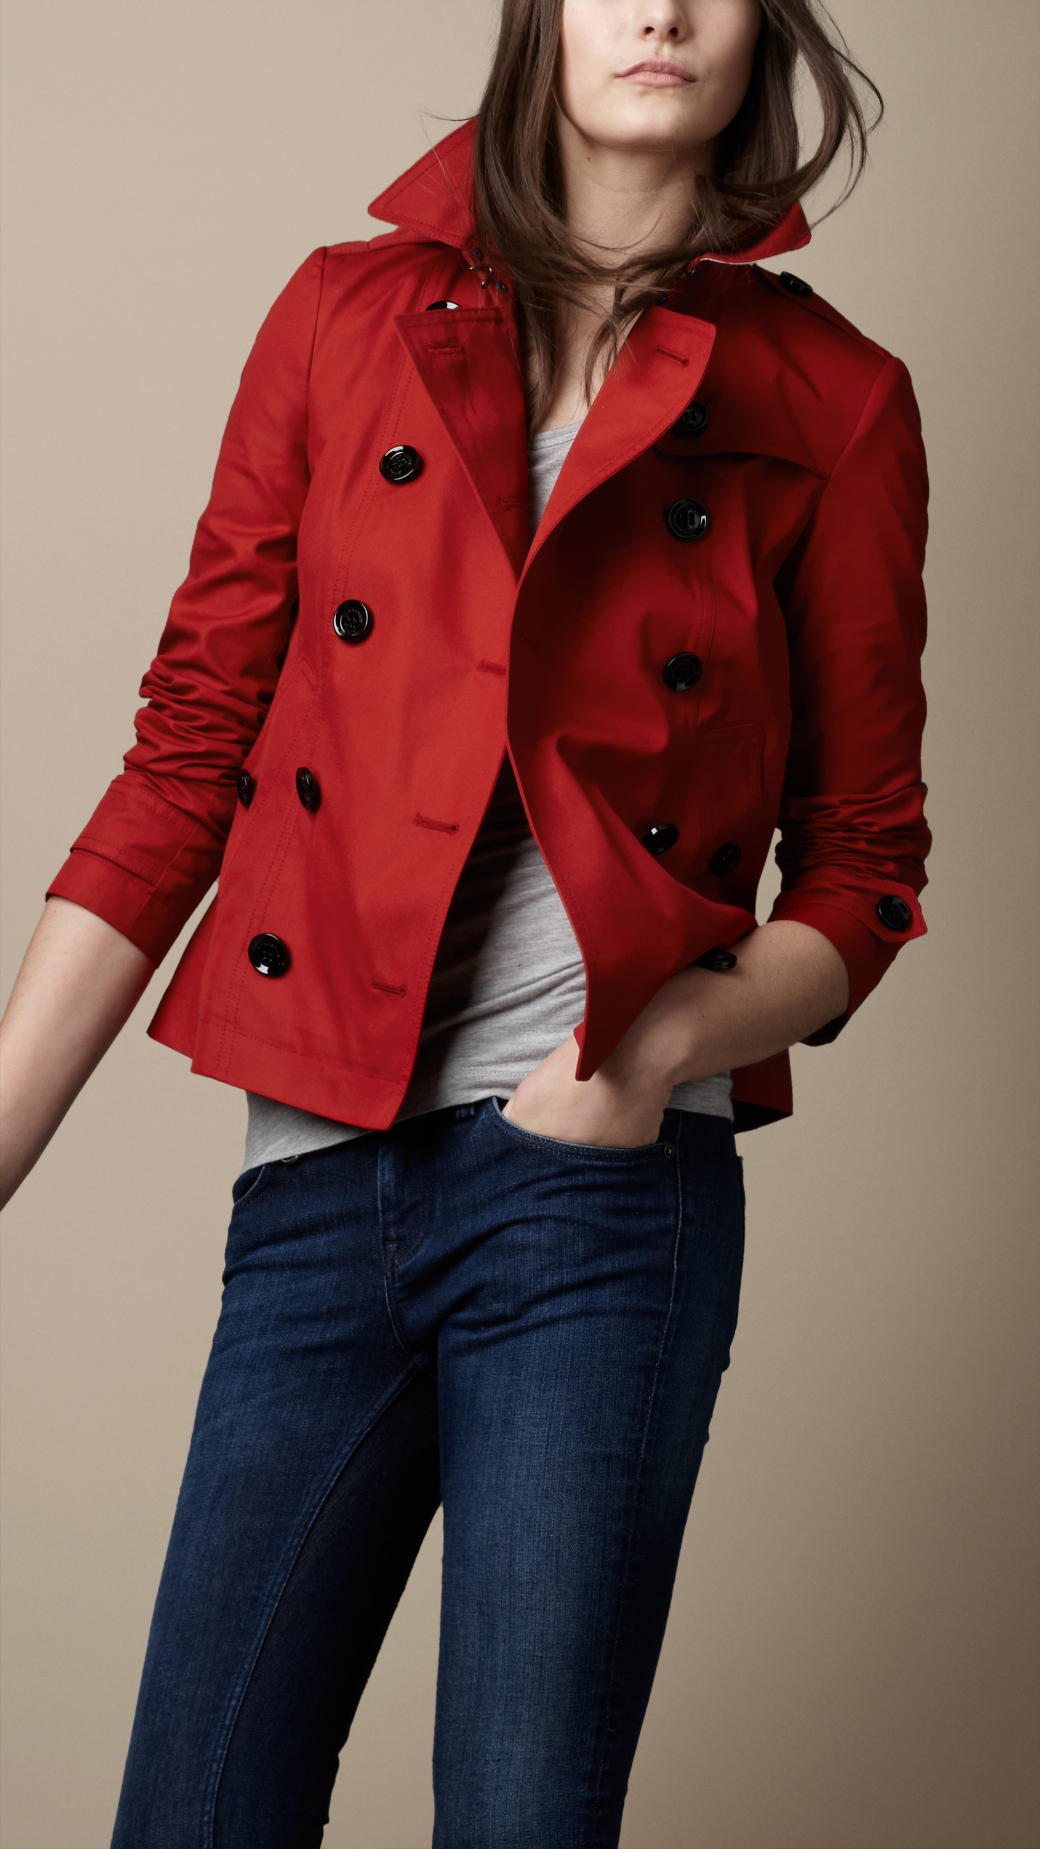 Lyst - Burberry Brit Short Cotton Trench Coat in Red